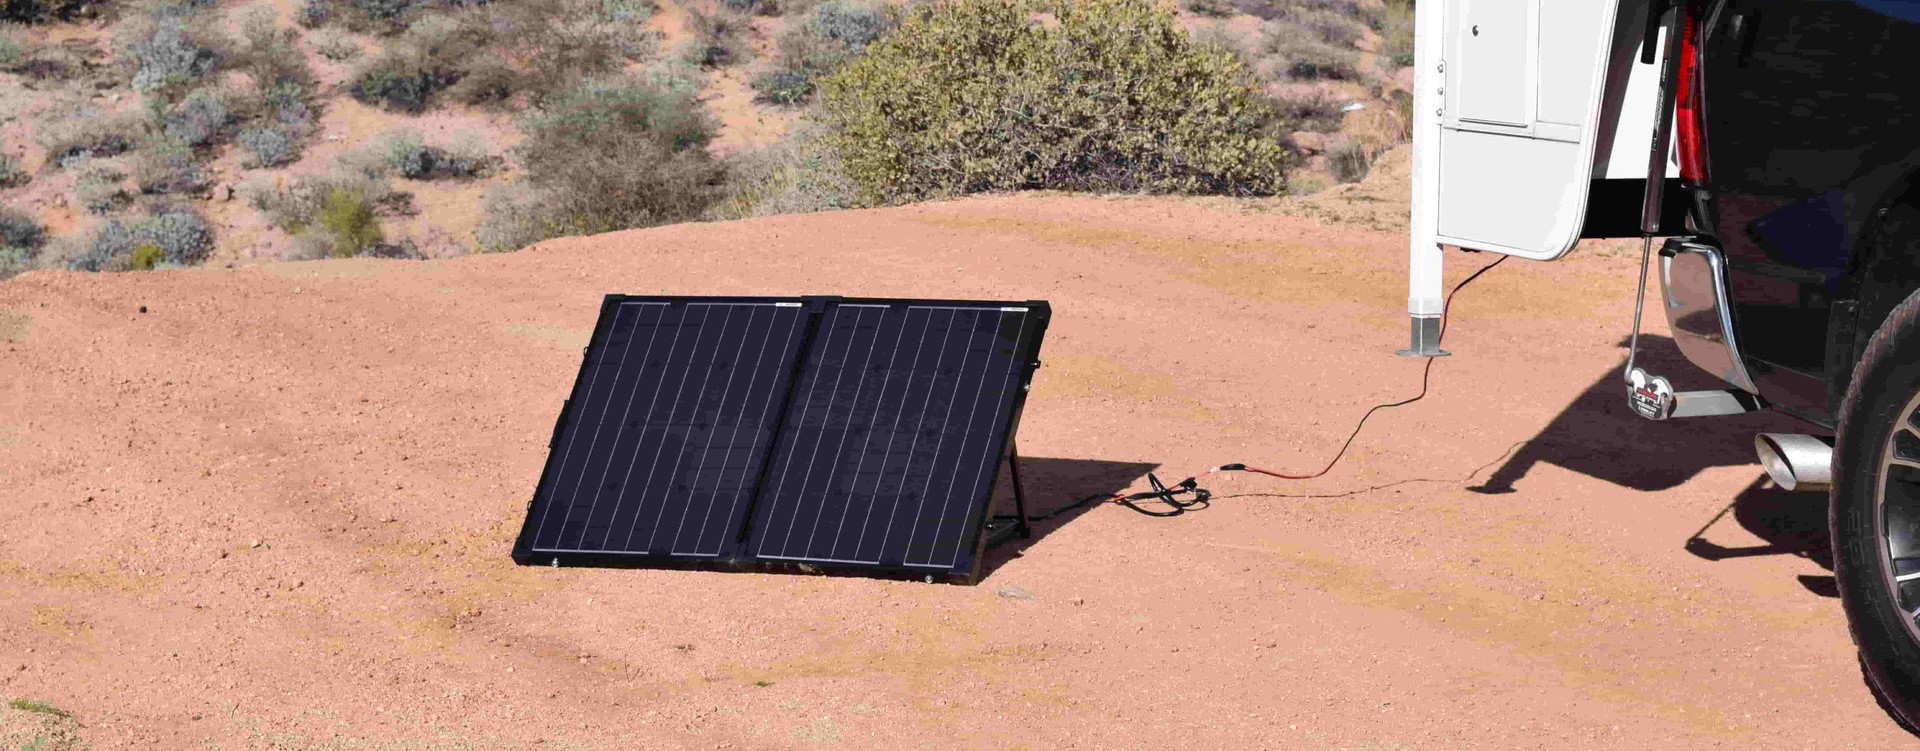 What to Know About Portable Solar Panels - Renogy United States